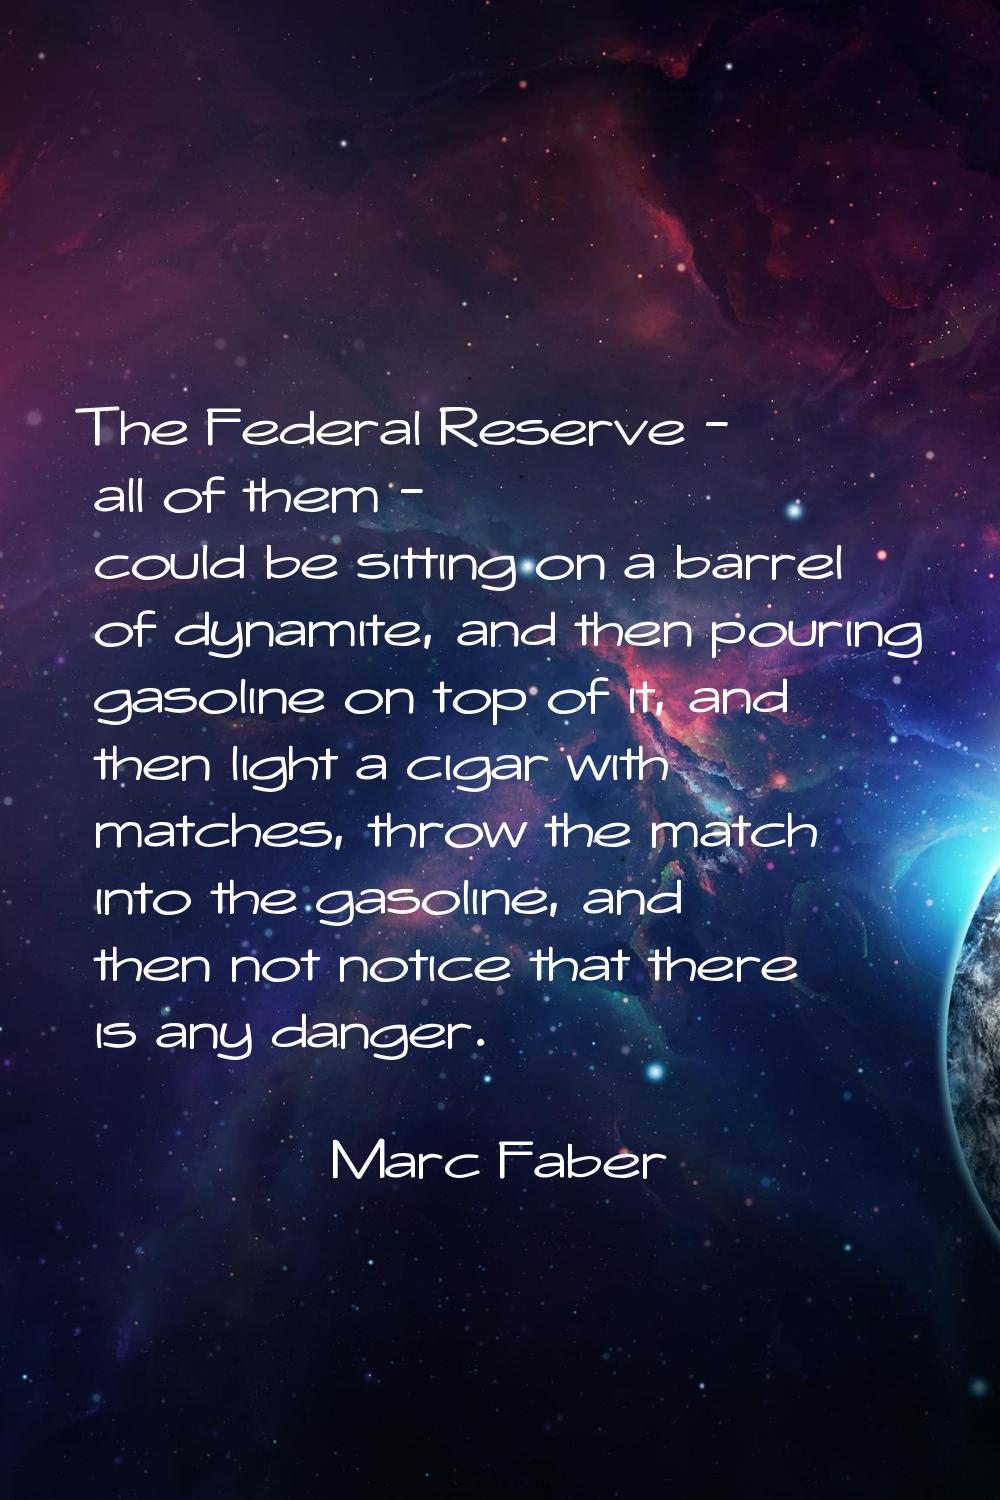 The Federal Reserve - all of them - could be sitting on a barrel of dynamite, and then pouring gaso